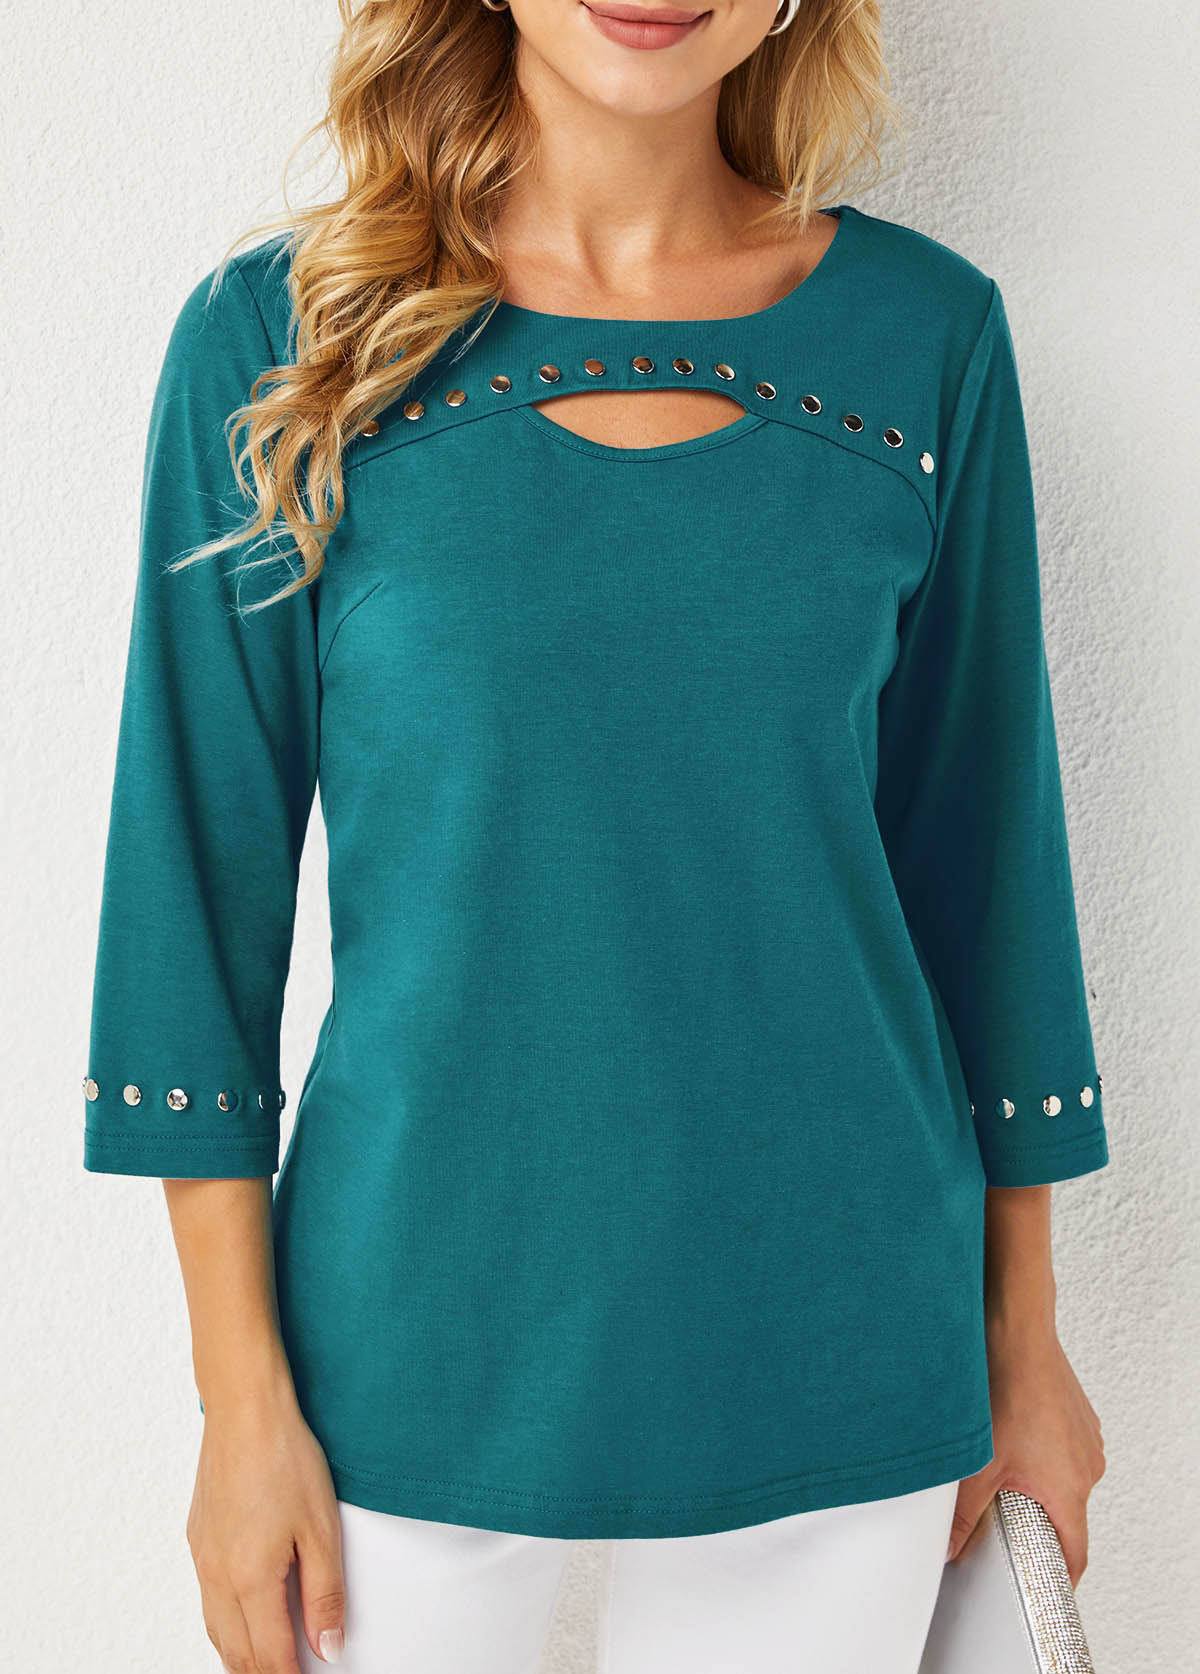 Cutout Front 3/4 Sleeve Round Neck T Shirt